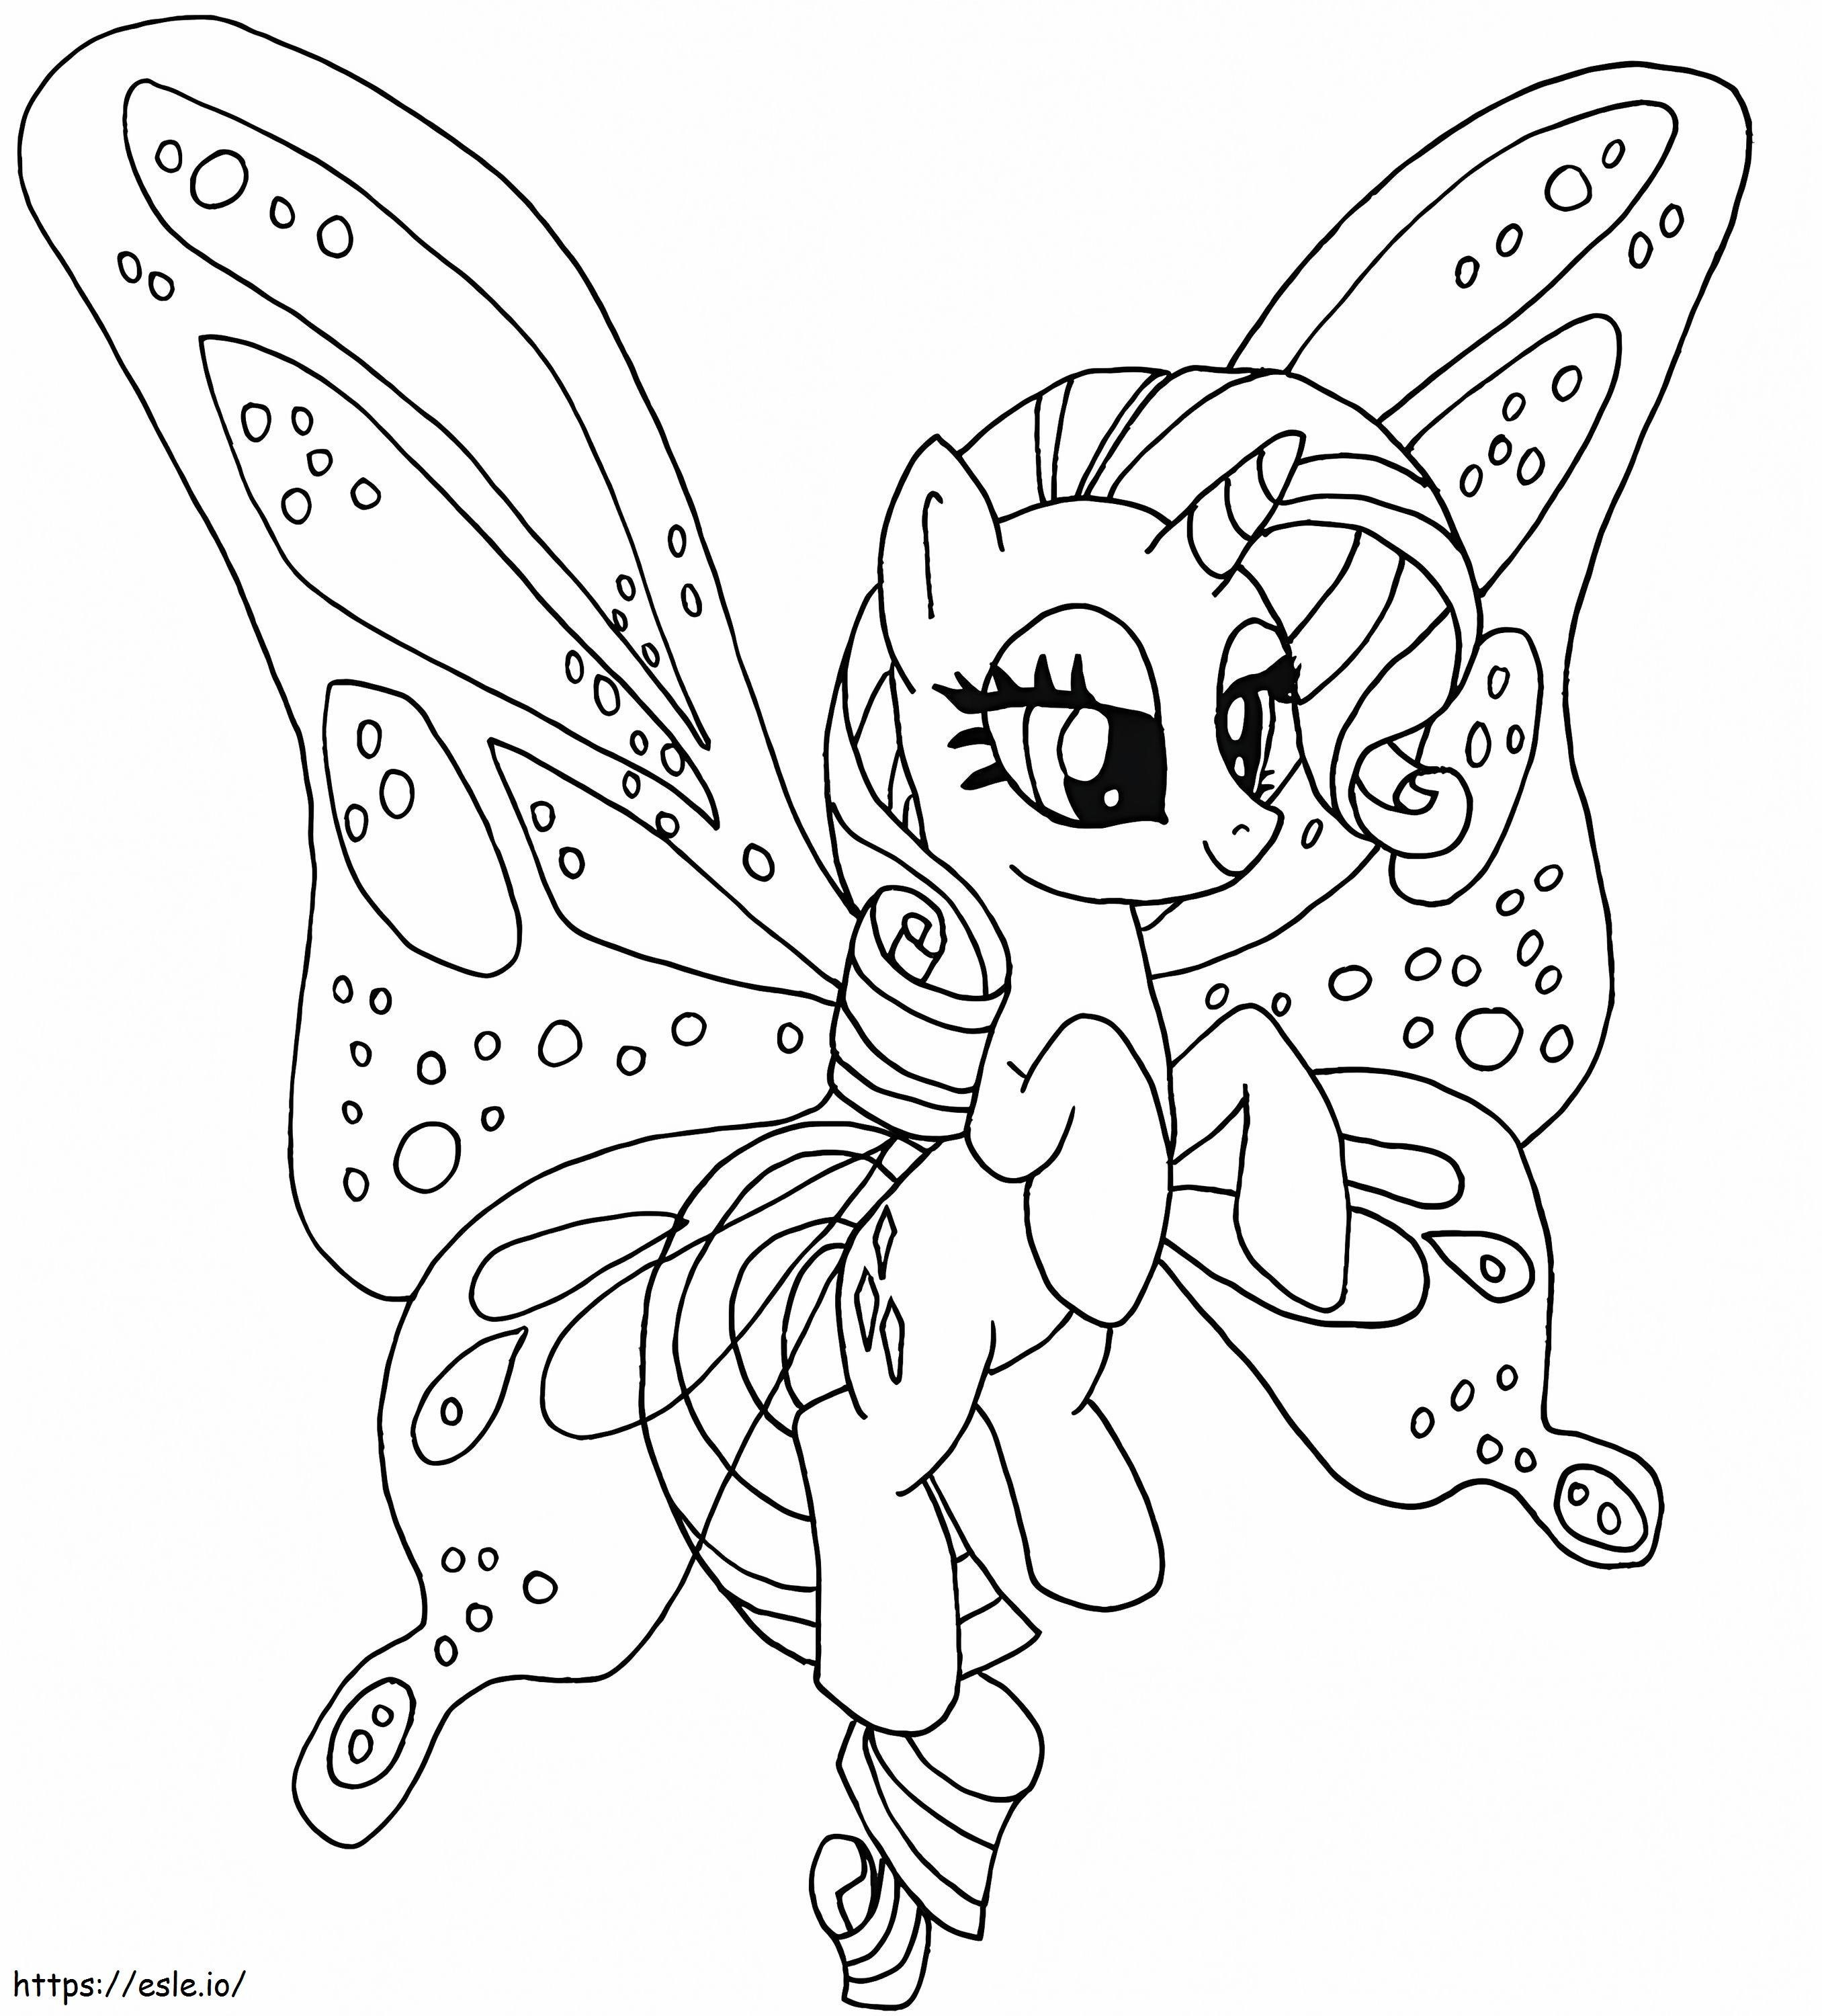 Rarity Pony coloring page